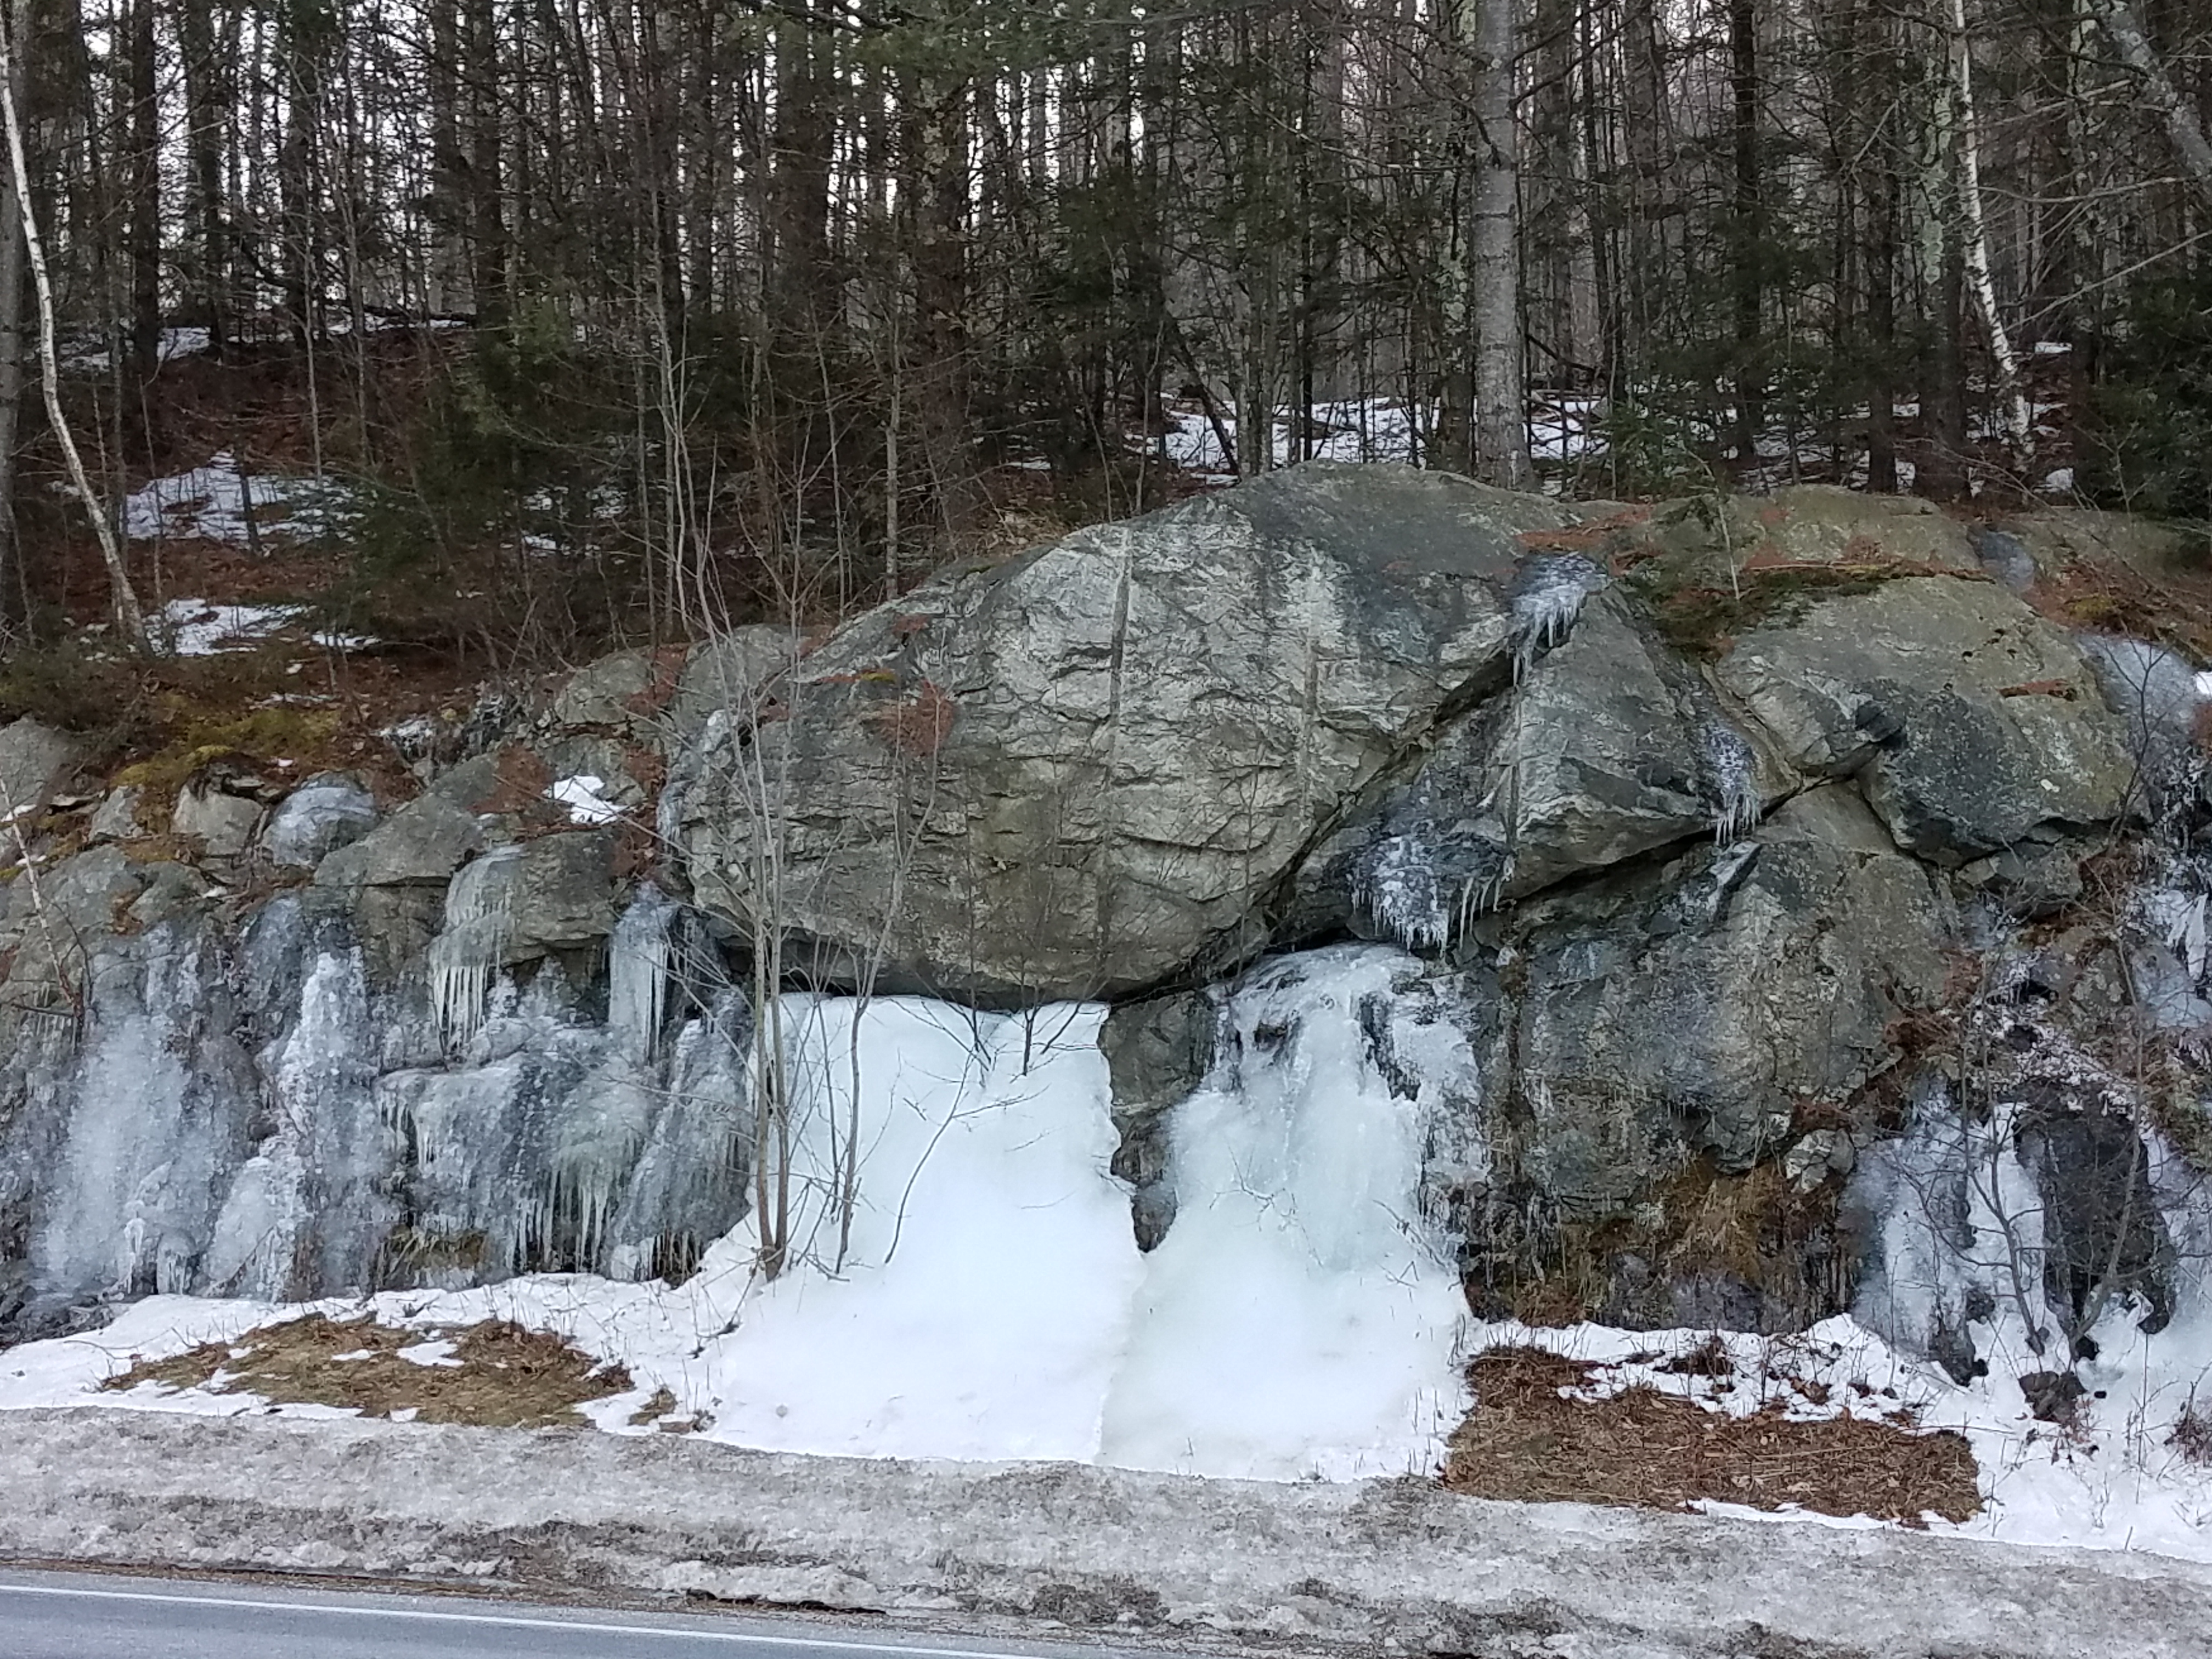 Groundwater seeps through rock formations and freezes in the winter.